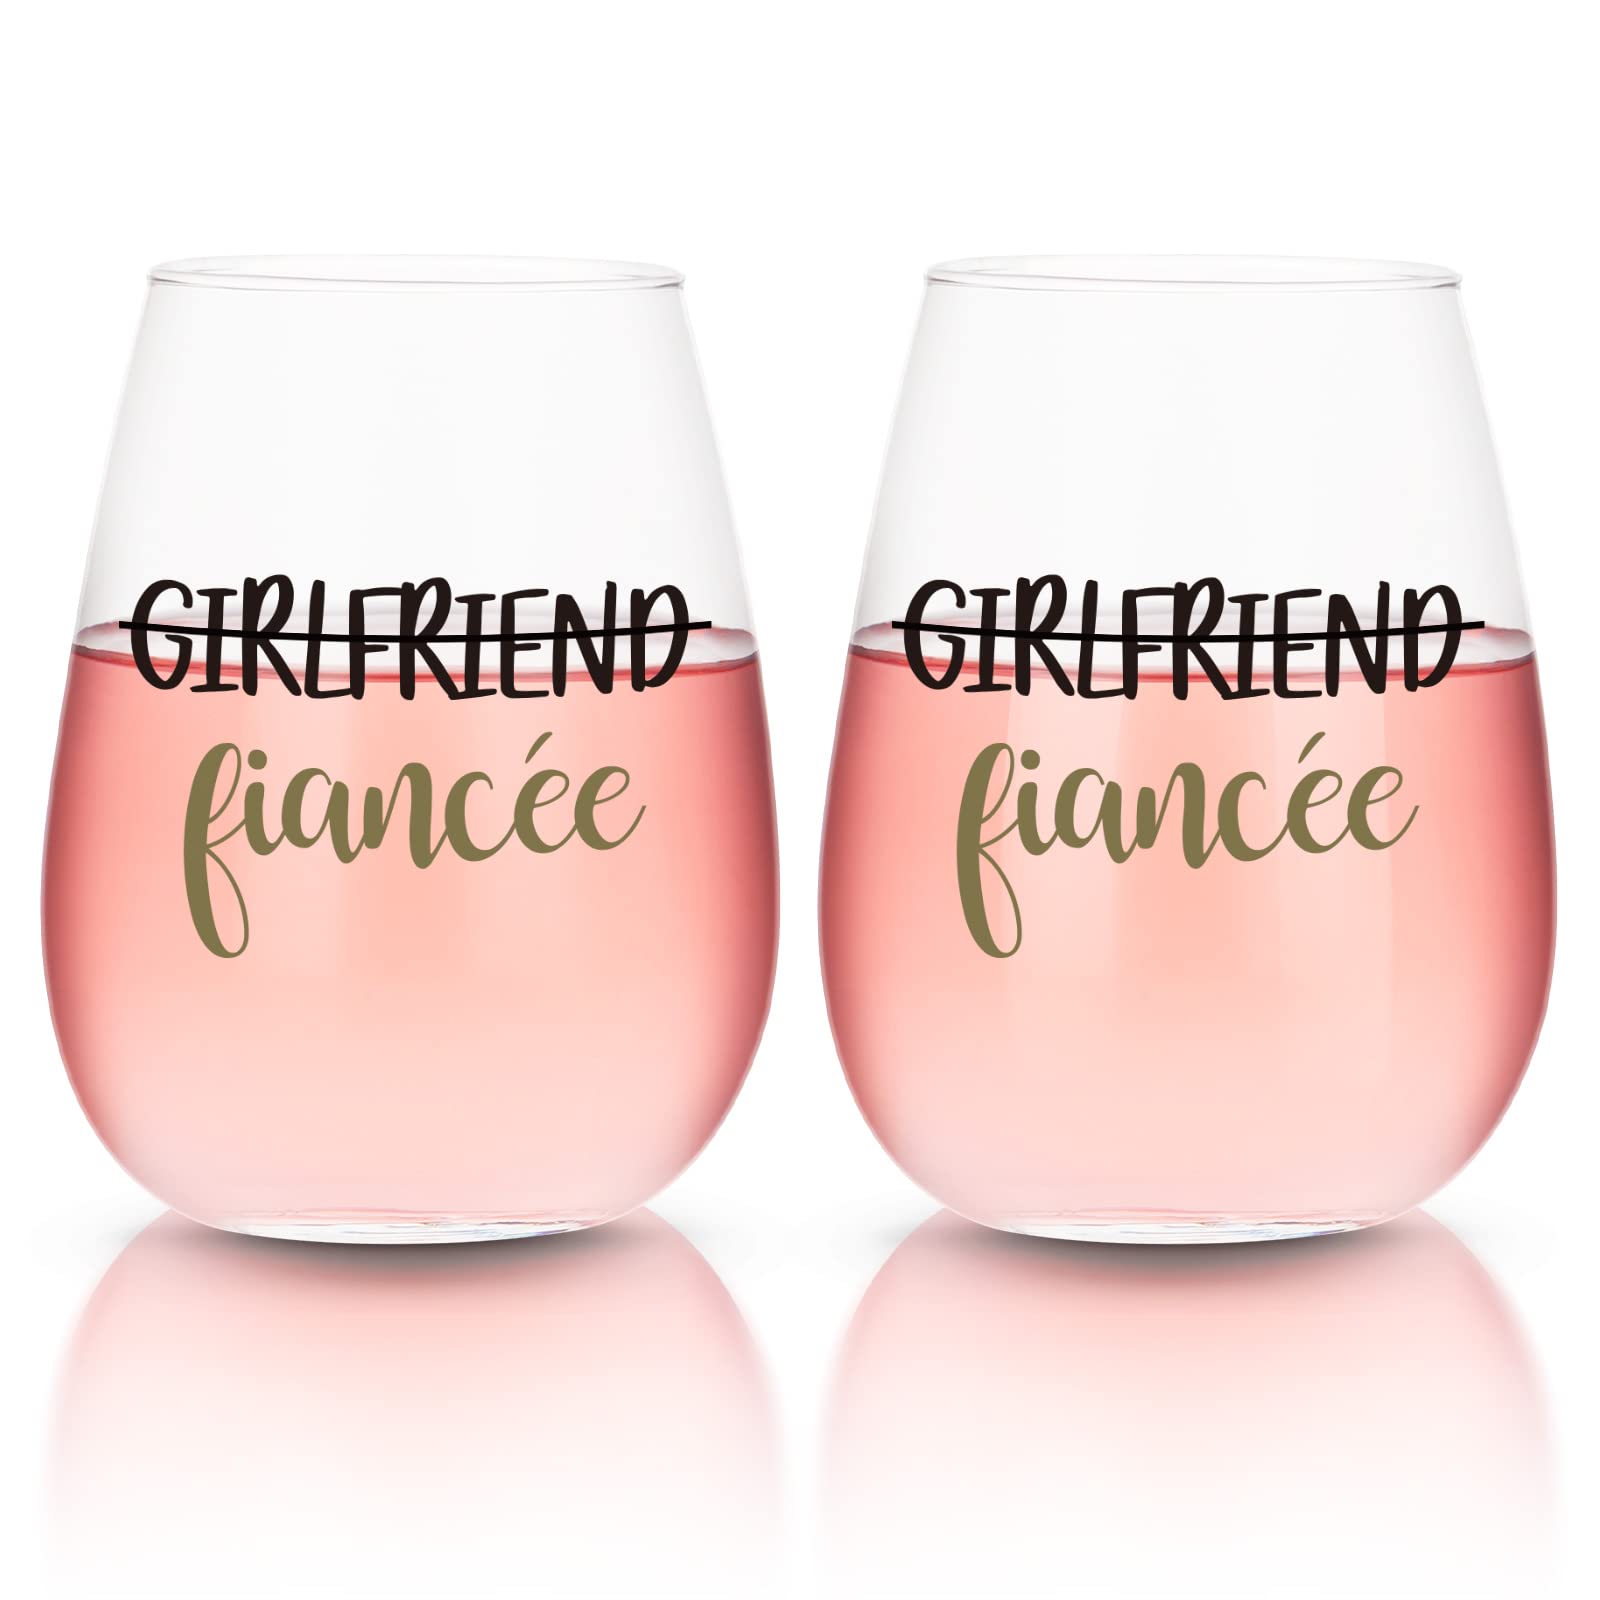 Modwnfy Girlfriend and Girlfriend Wine Glasses, Engagement Gifts for Lesbian Couples, Girlfriends Newly Engaged Unique Stemless Wine Glasses, Set of 2 Lesbian Gifts, Valentines Lesbian Stuff, 15 oz